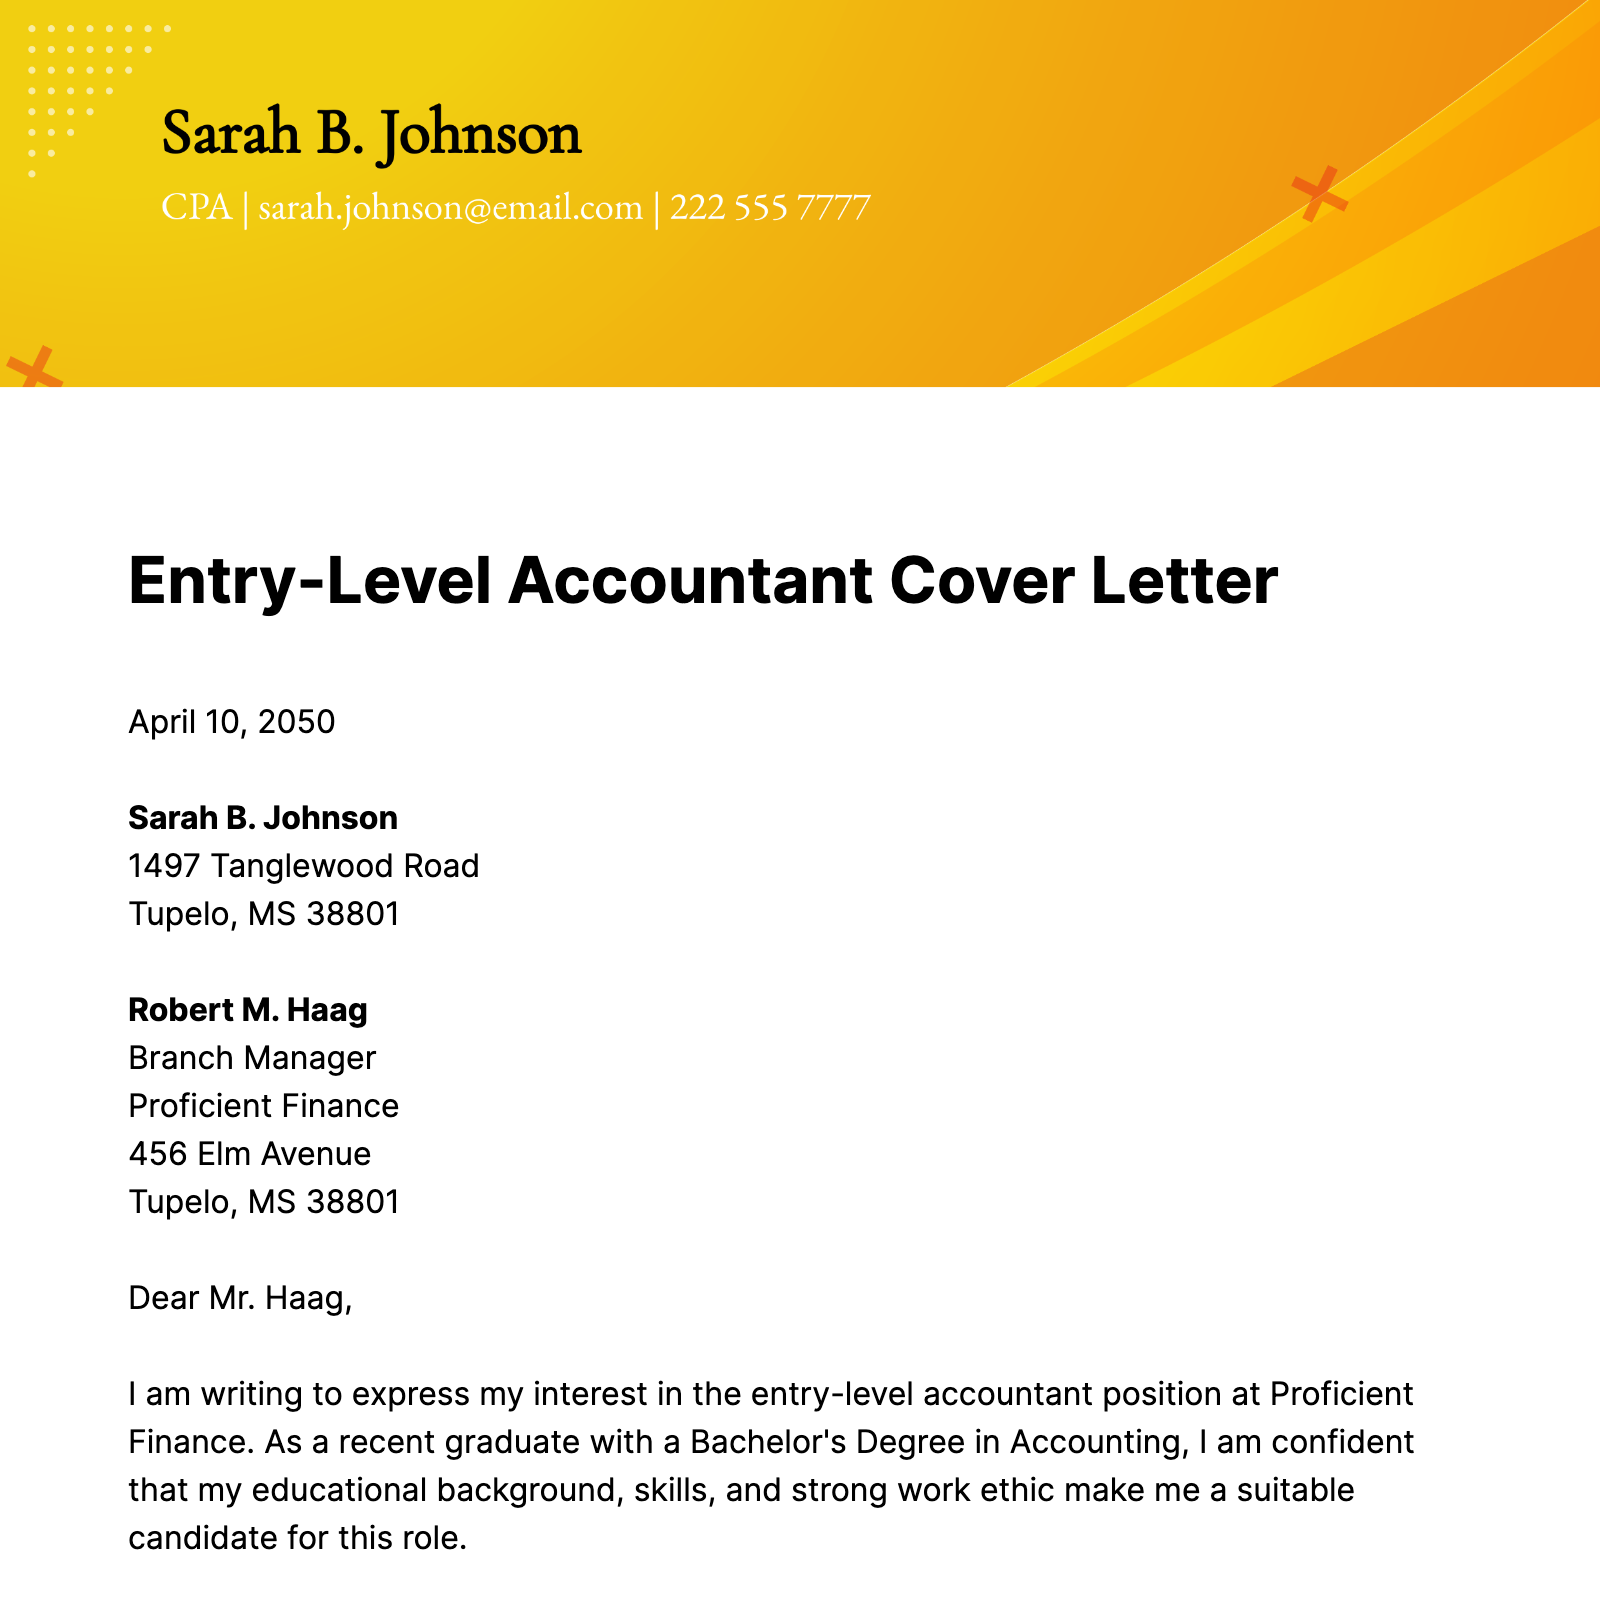 Entry-Level Accountant Cover Letter  Template